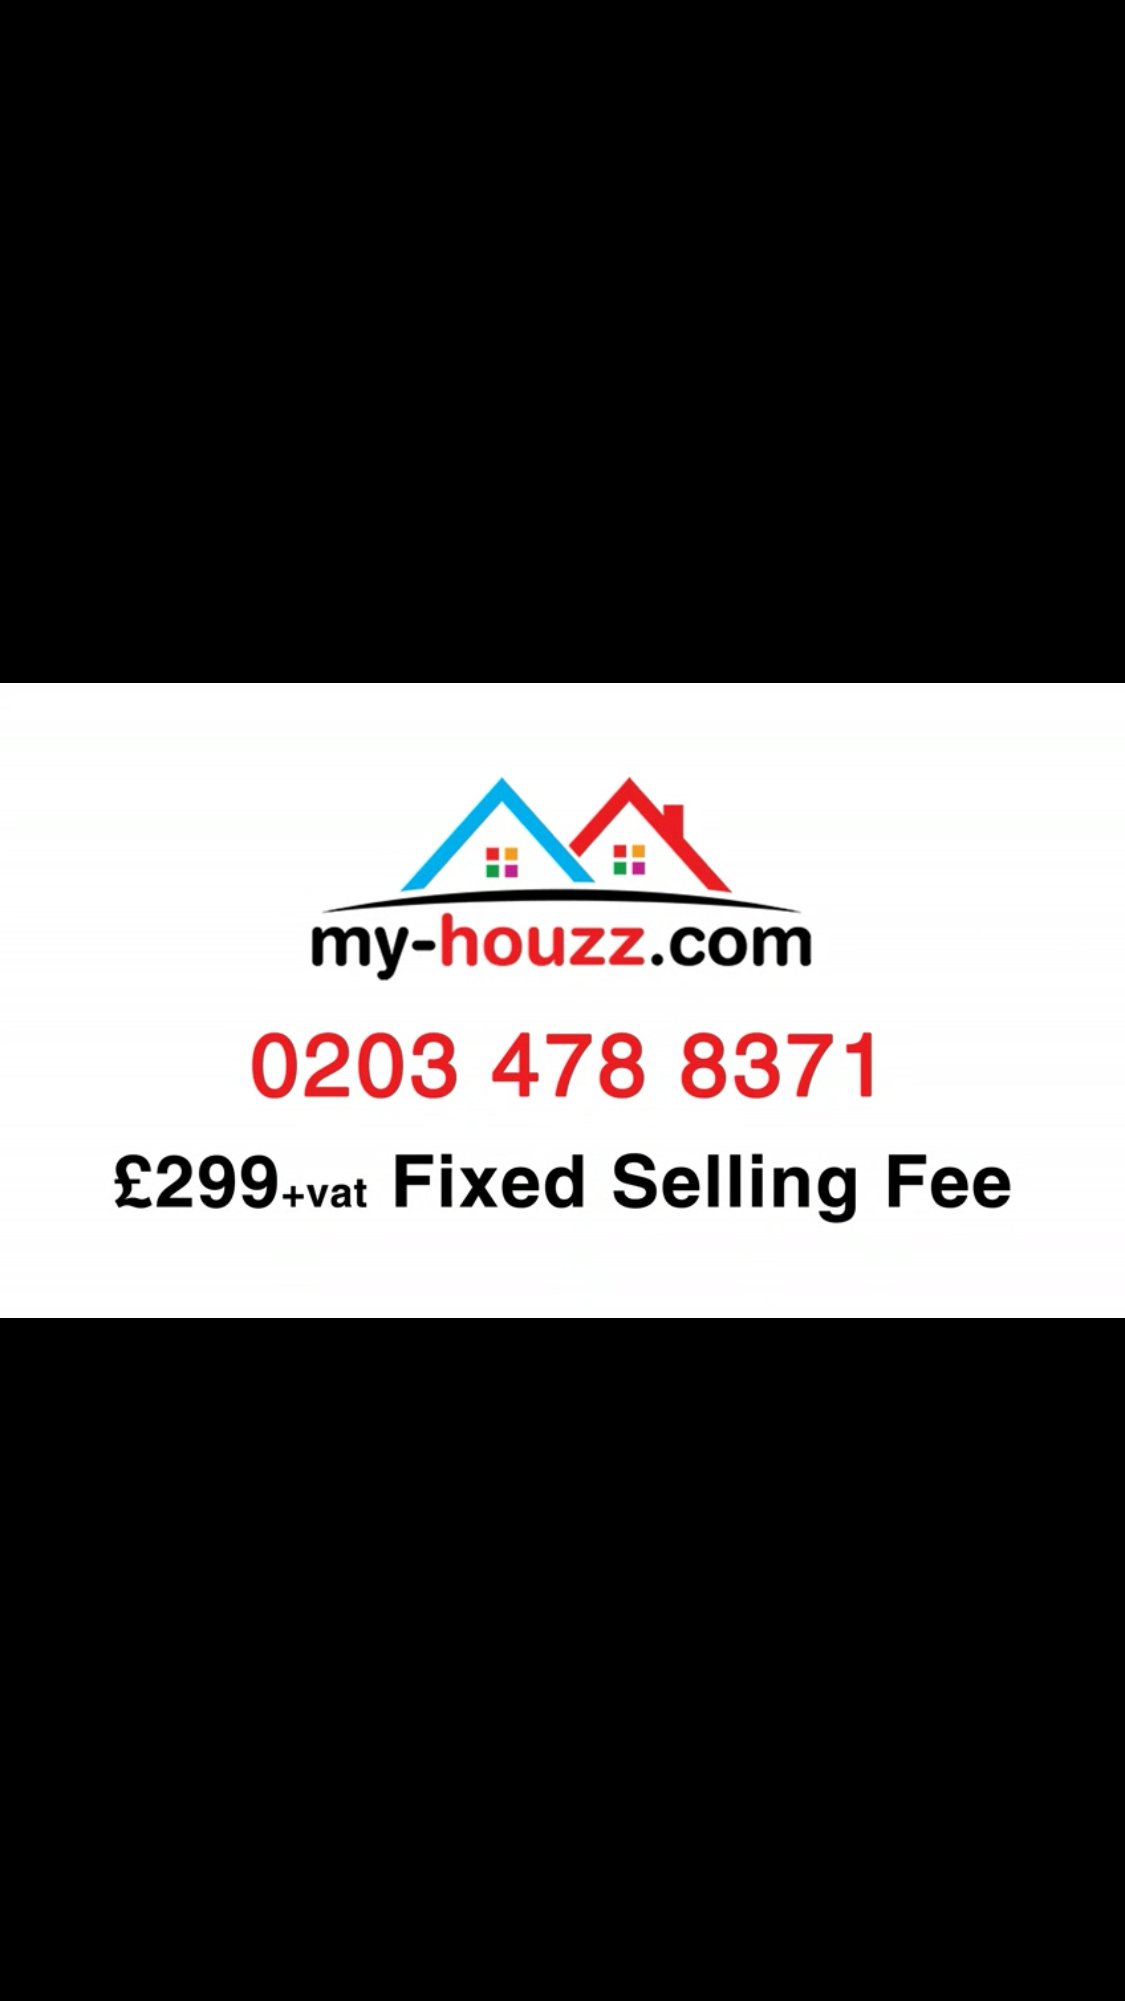 https://t.co/RR5YXXw8Vz hybrid estate agency that’s open 24/7 with Nationwide Coverage. All-Inclusive Service ONE Low Sensible Marketing FEE with NO Commissions